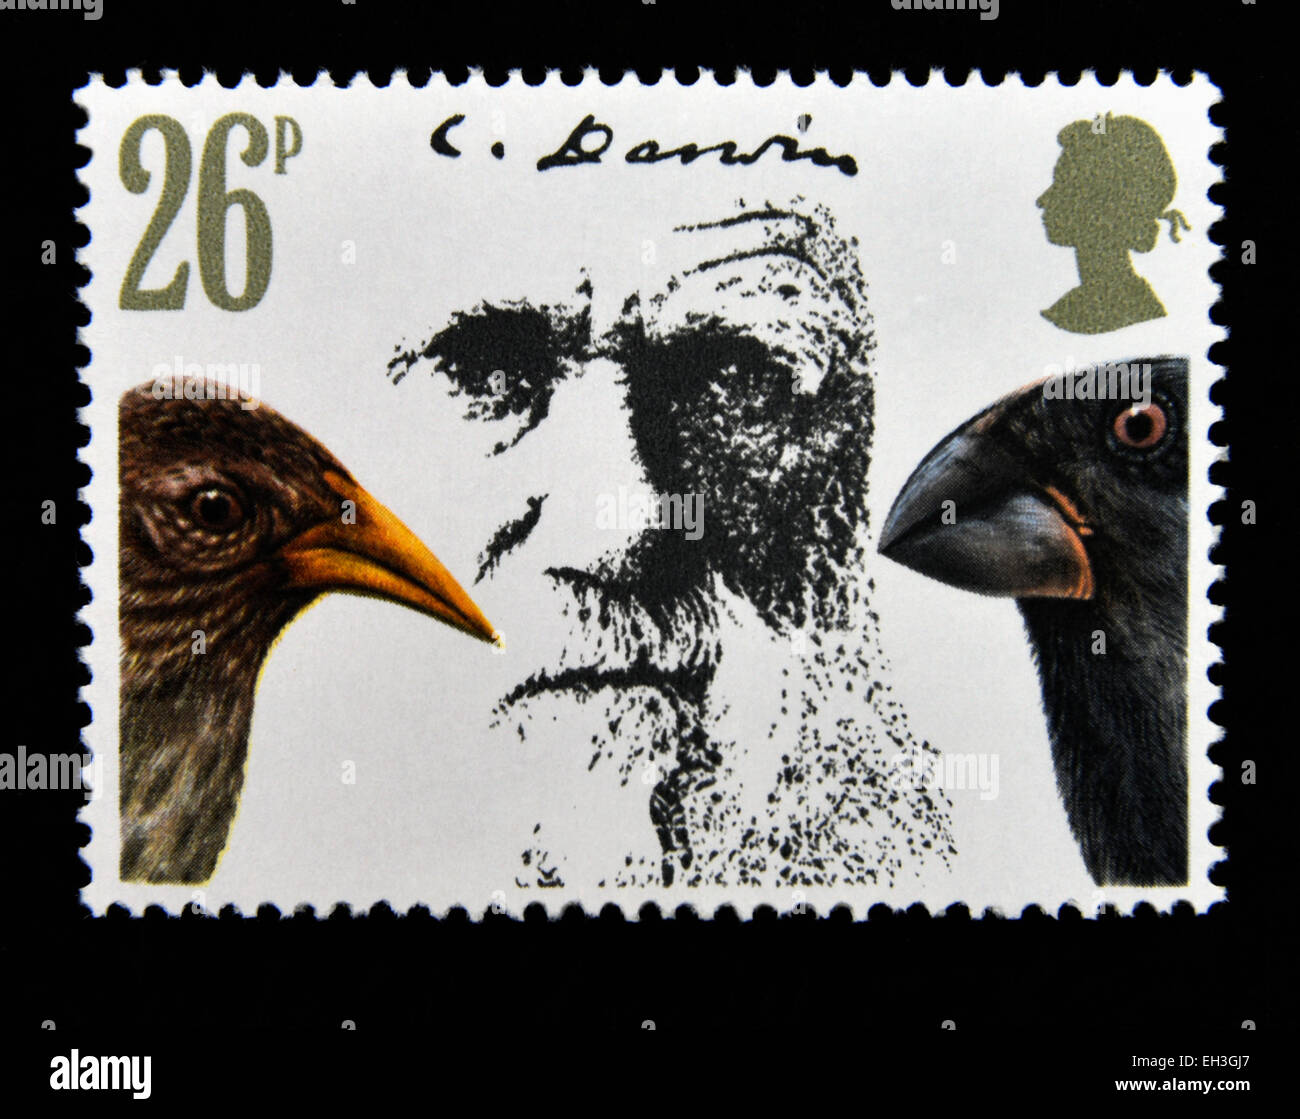 Postage stamp. Great Britain. Queen Elizabeth II. 1982. Death Centenary of Charles Darwin. Charles Darwin and Birds. Stock Photo